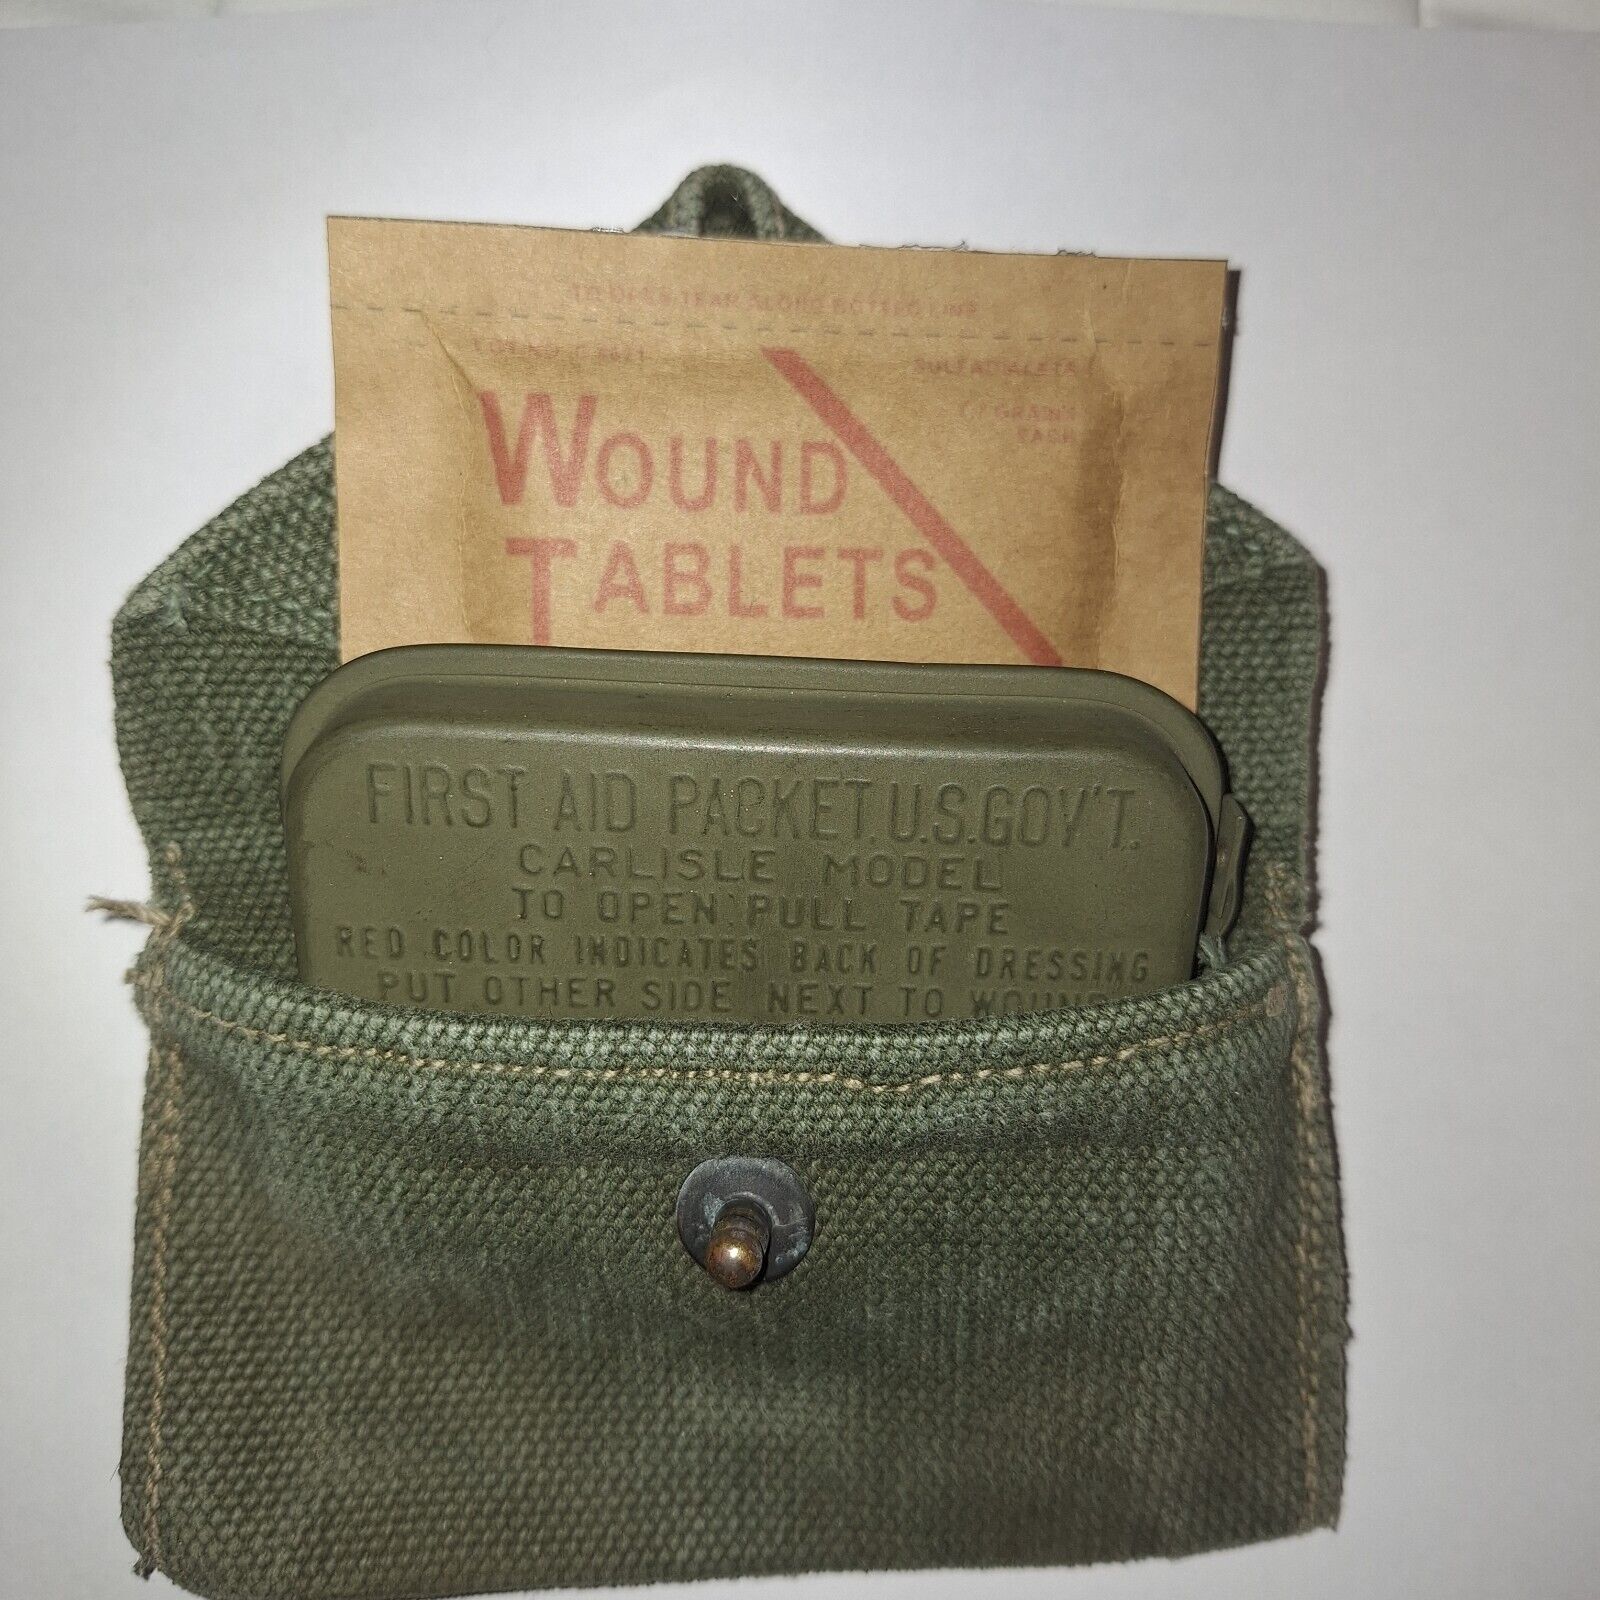 WW2 medical United States wound tablets reproduction package